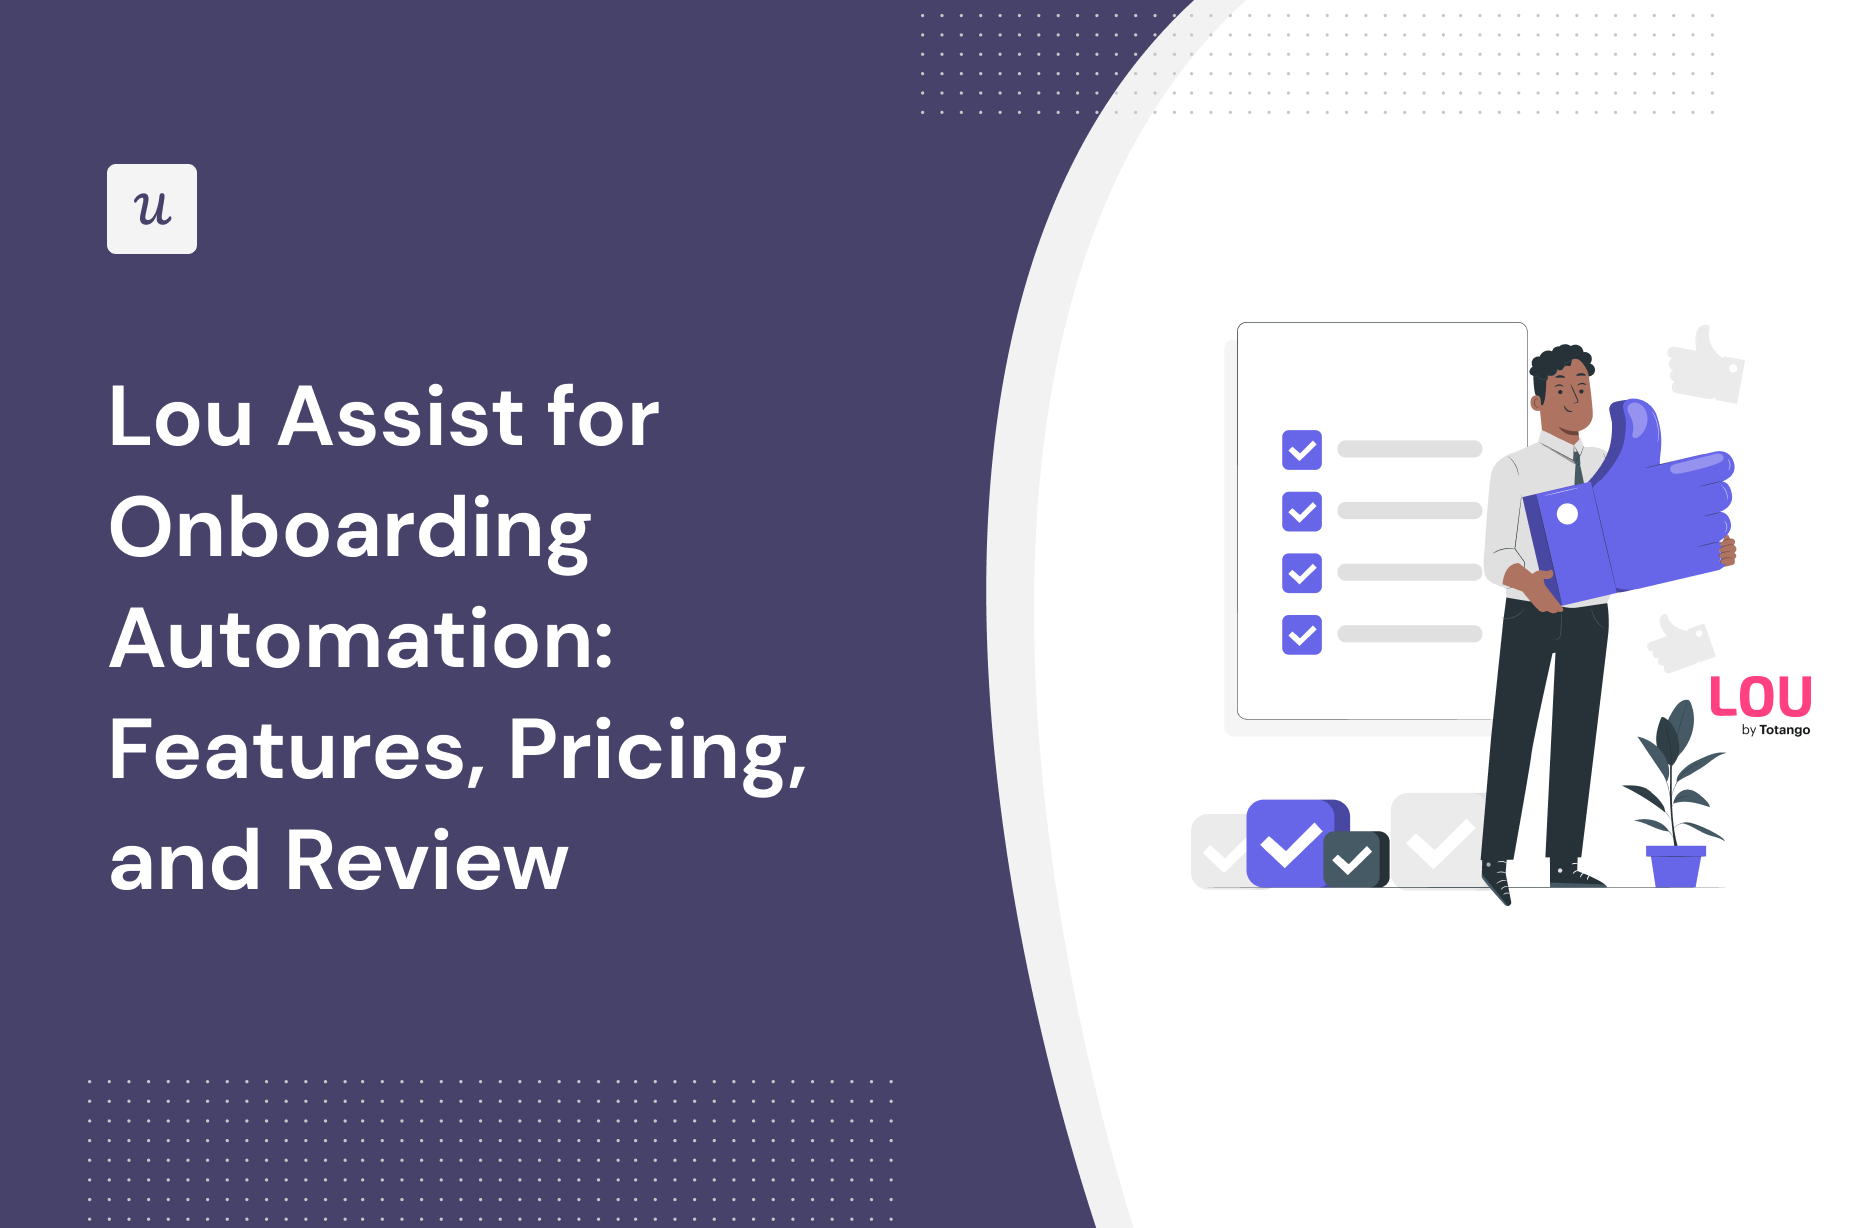 Lou Assist for Onboarding Automation: Features, Pricing, and Review